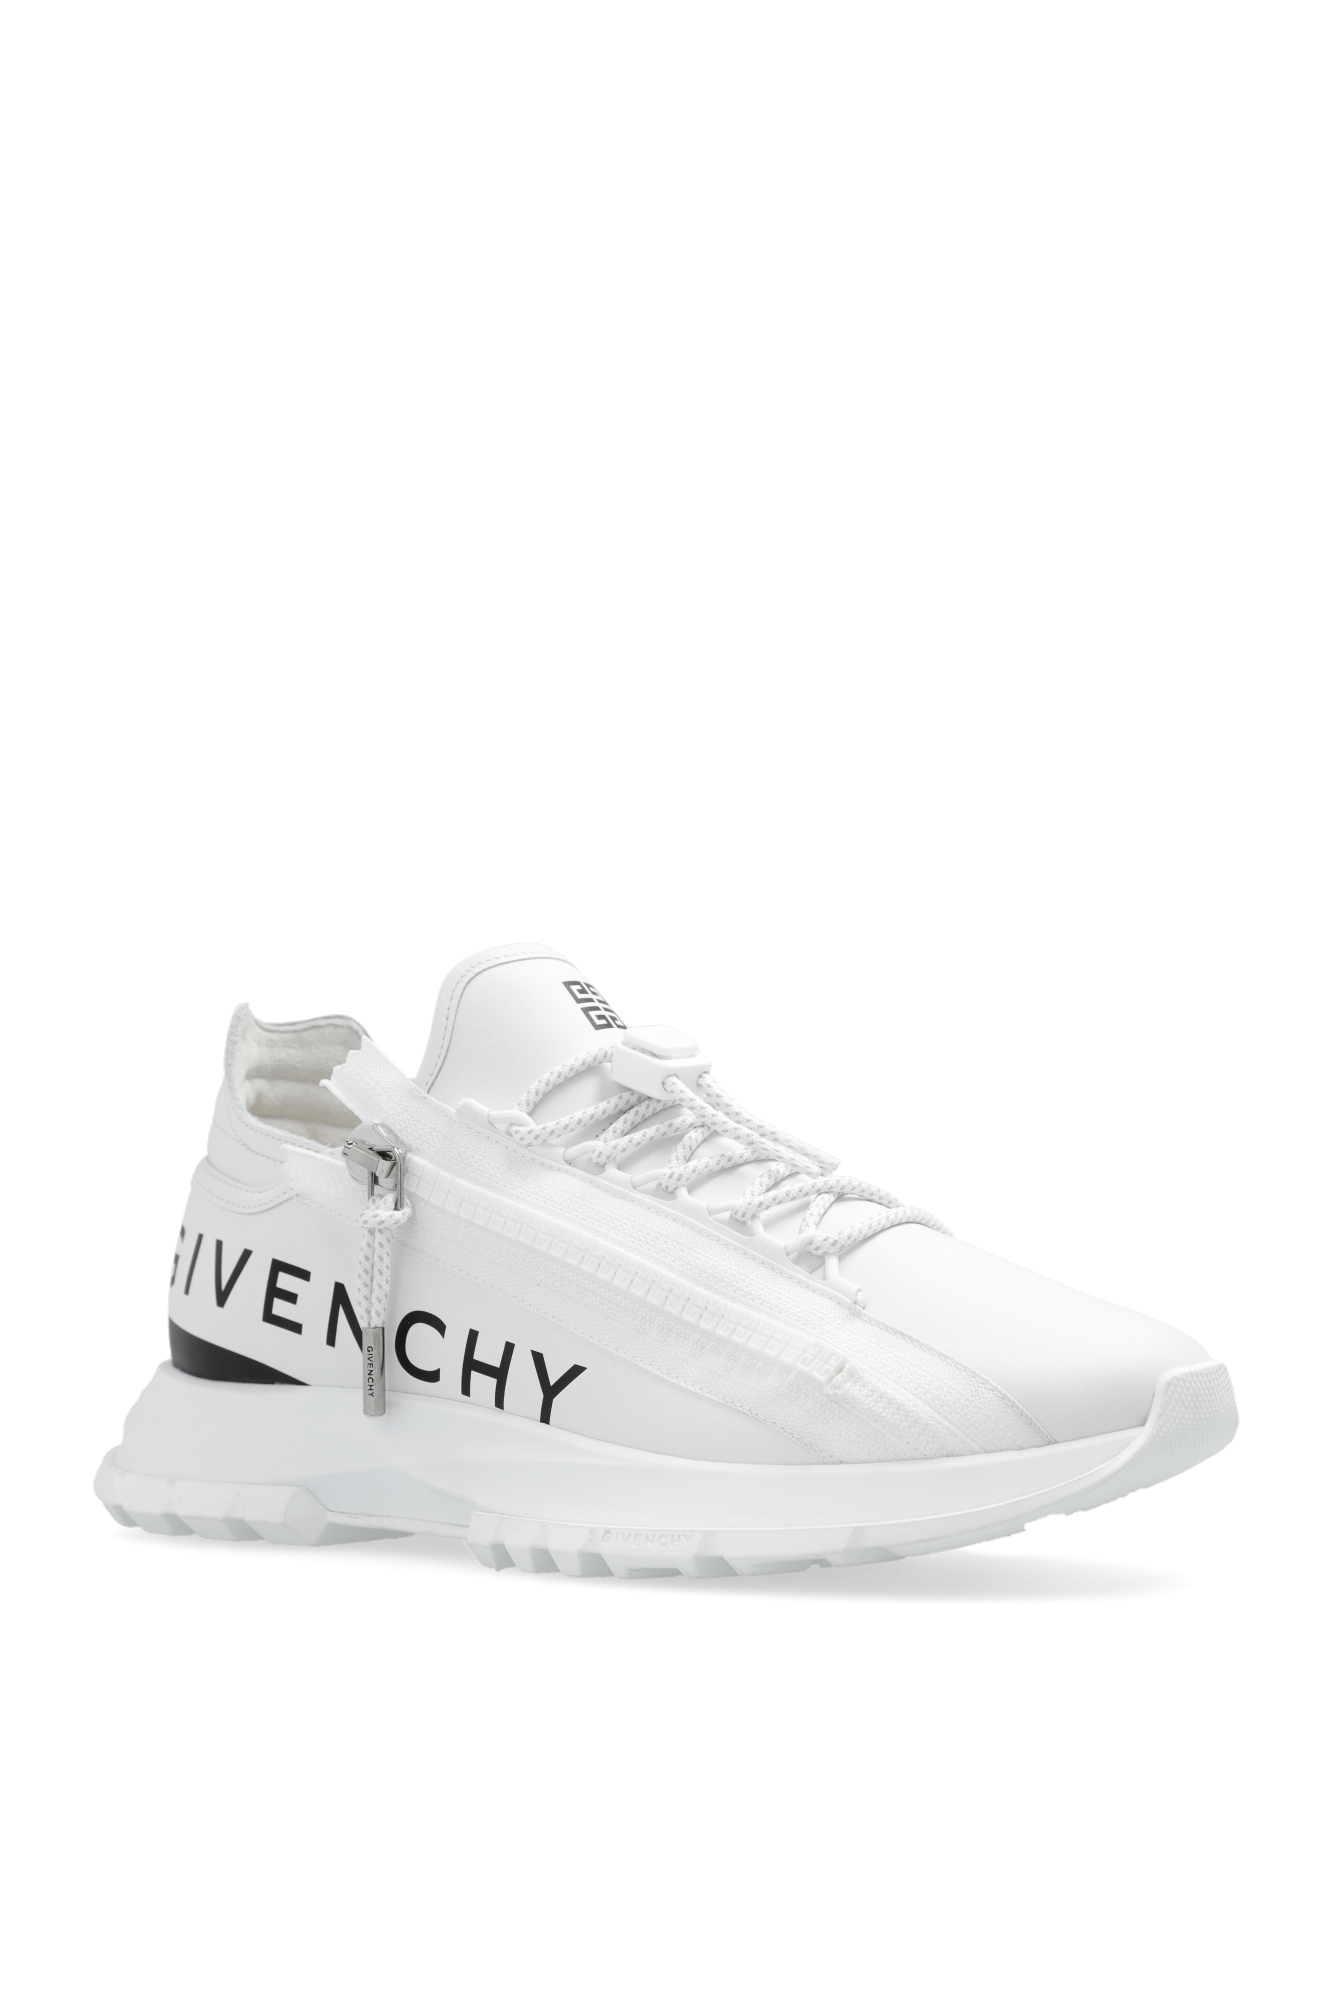 Givenchy ‘Spectre‘ sneakers